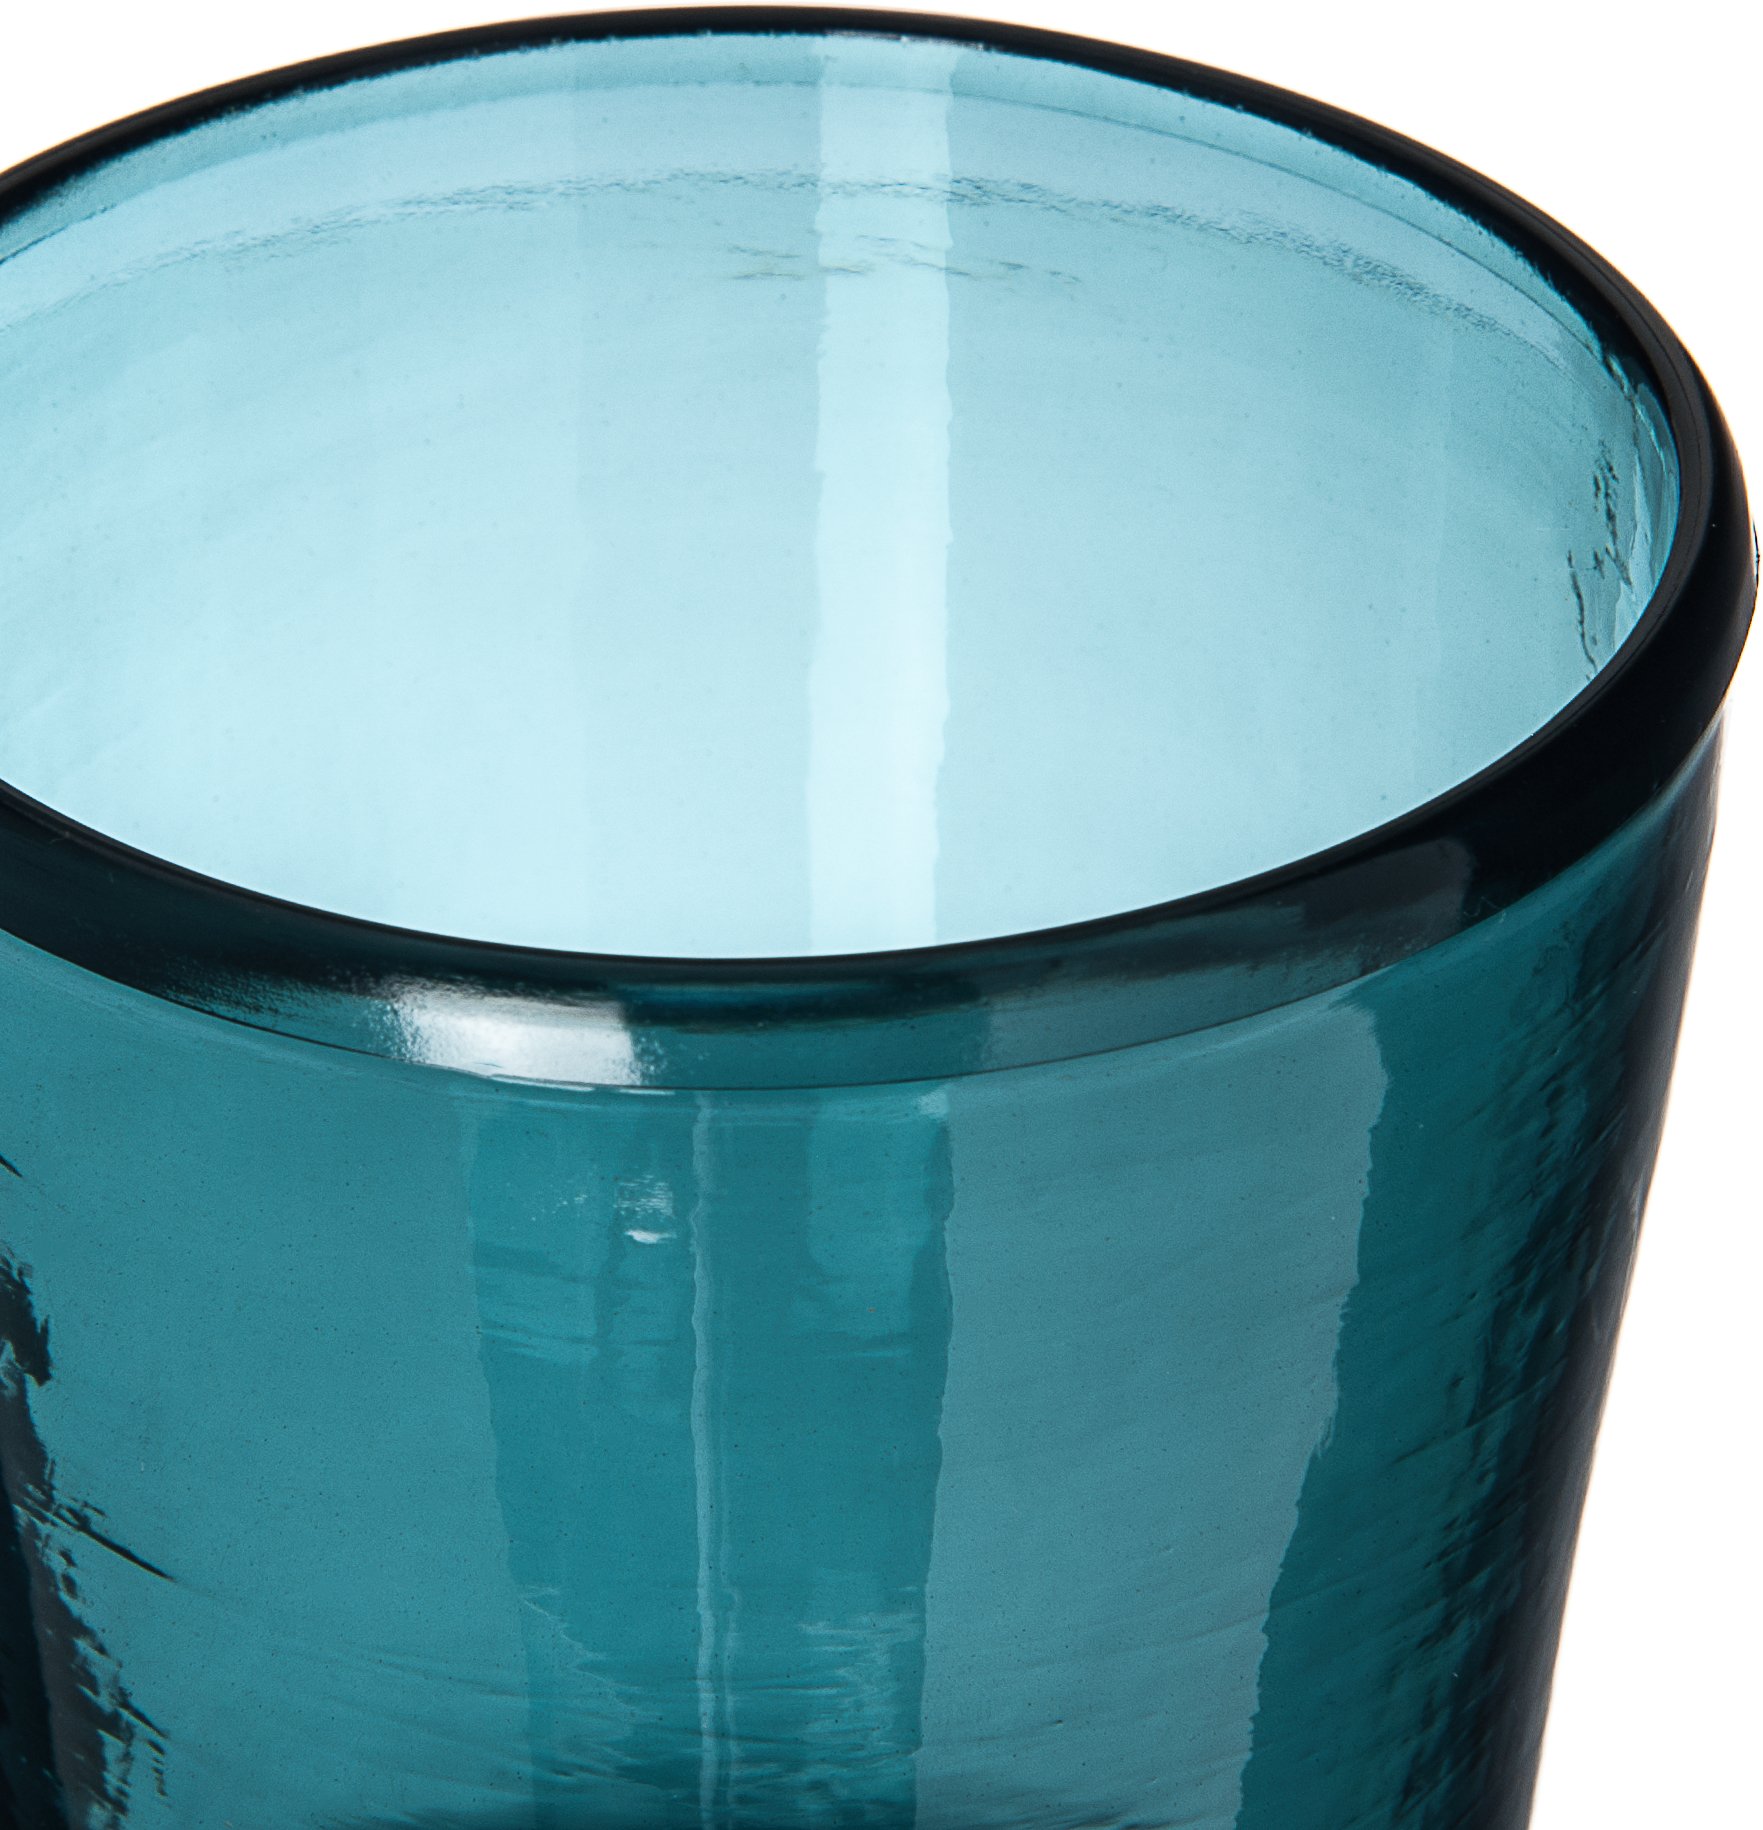 Carlisle FoodService Products MIN544015 Mingle Double Old Fashioned, 14 oz, Tritan, Teal (Pack of 12)